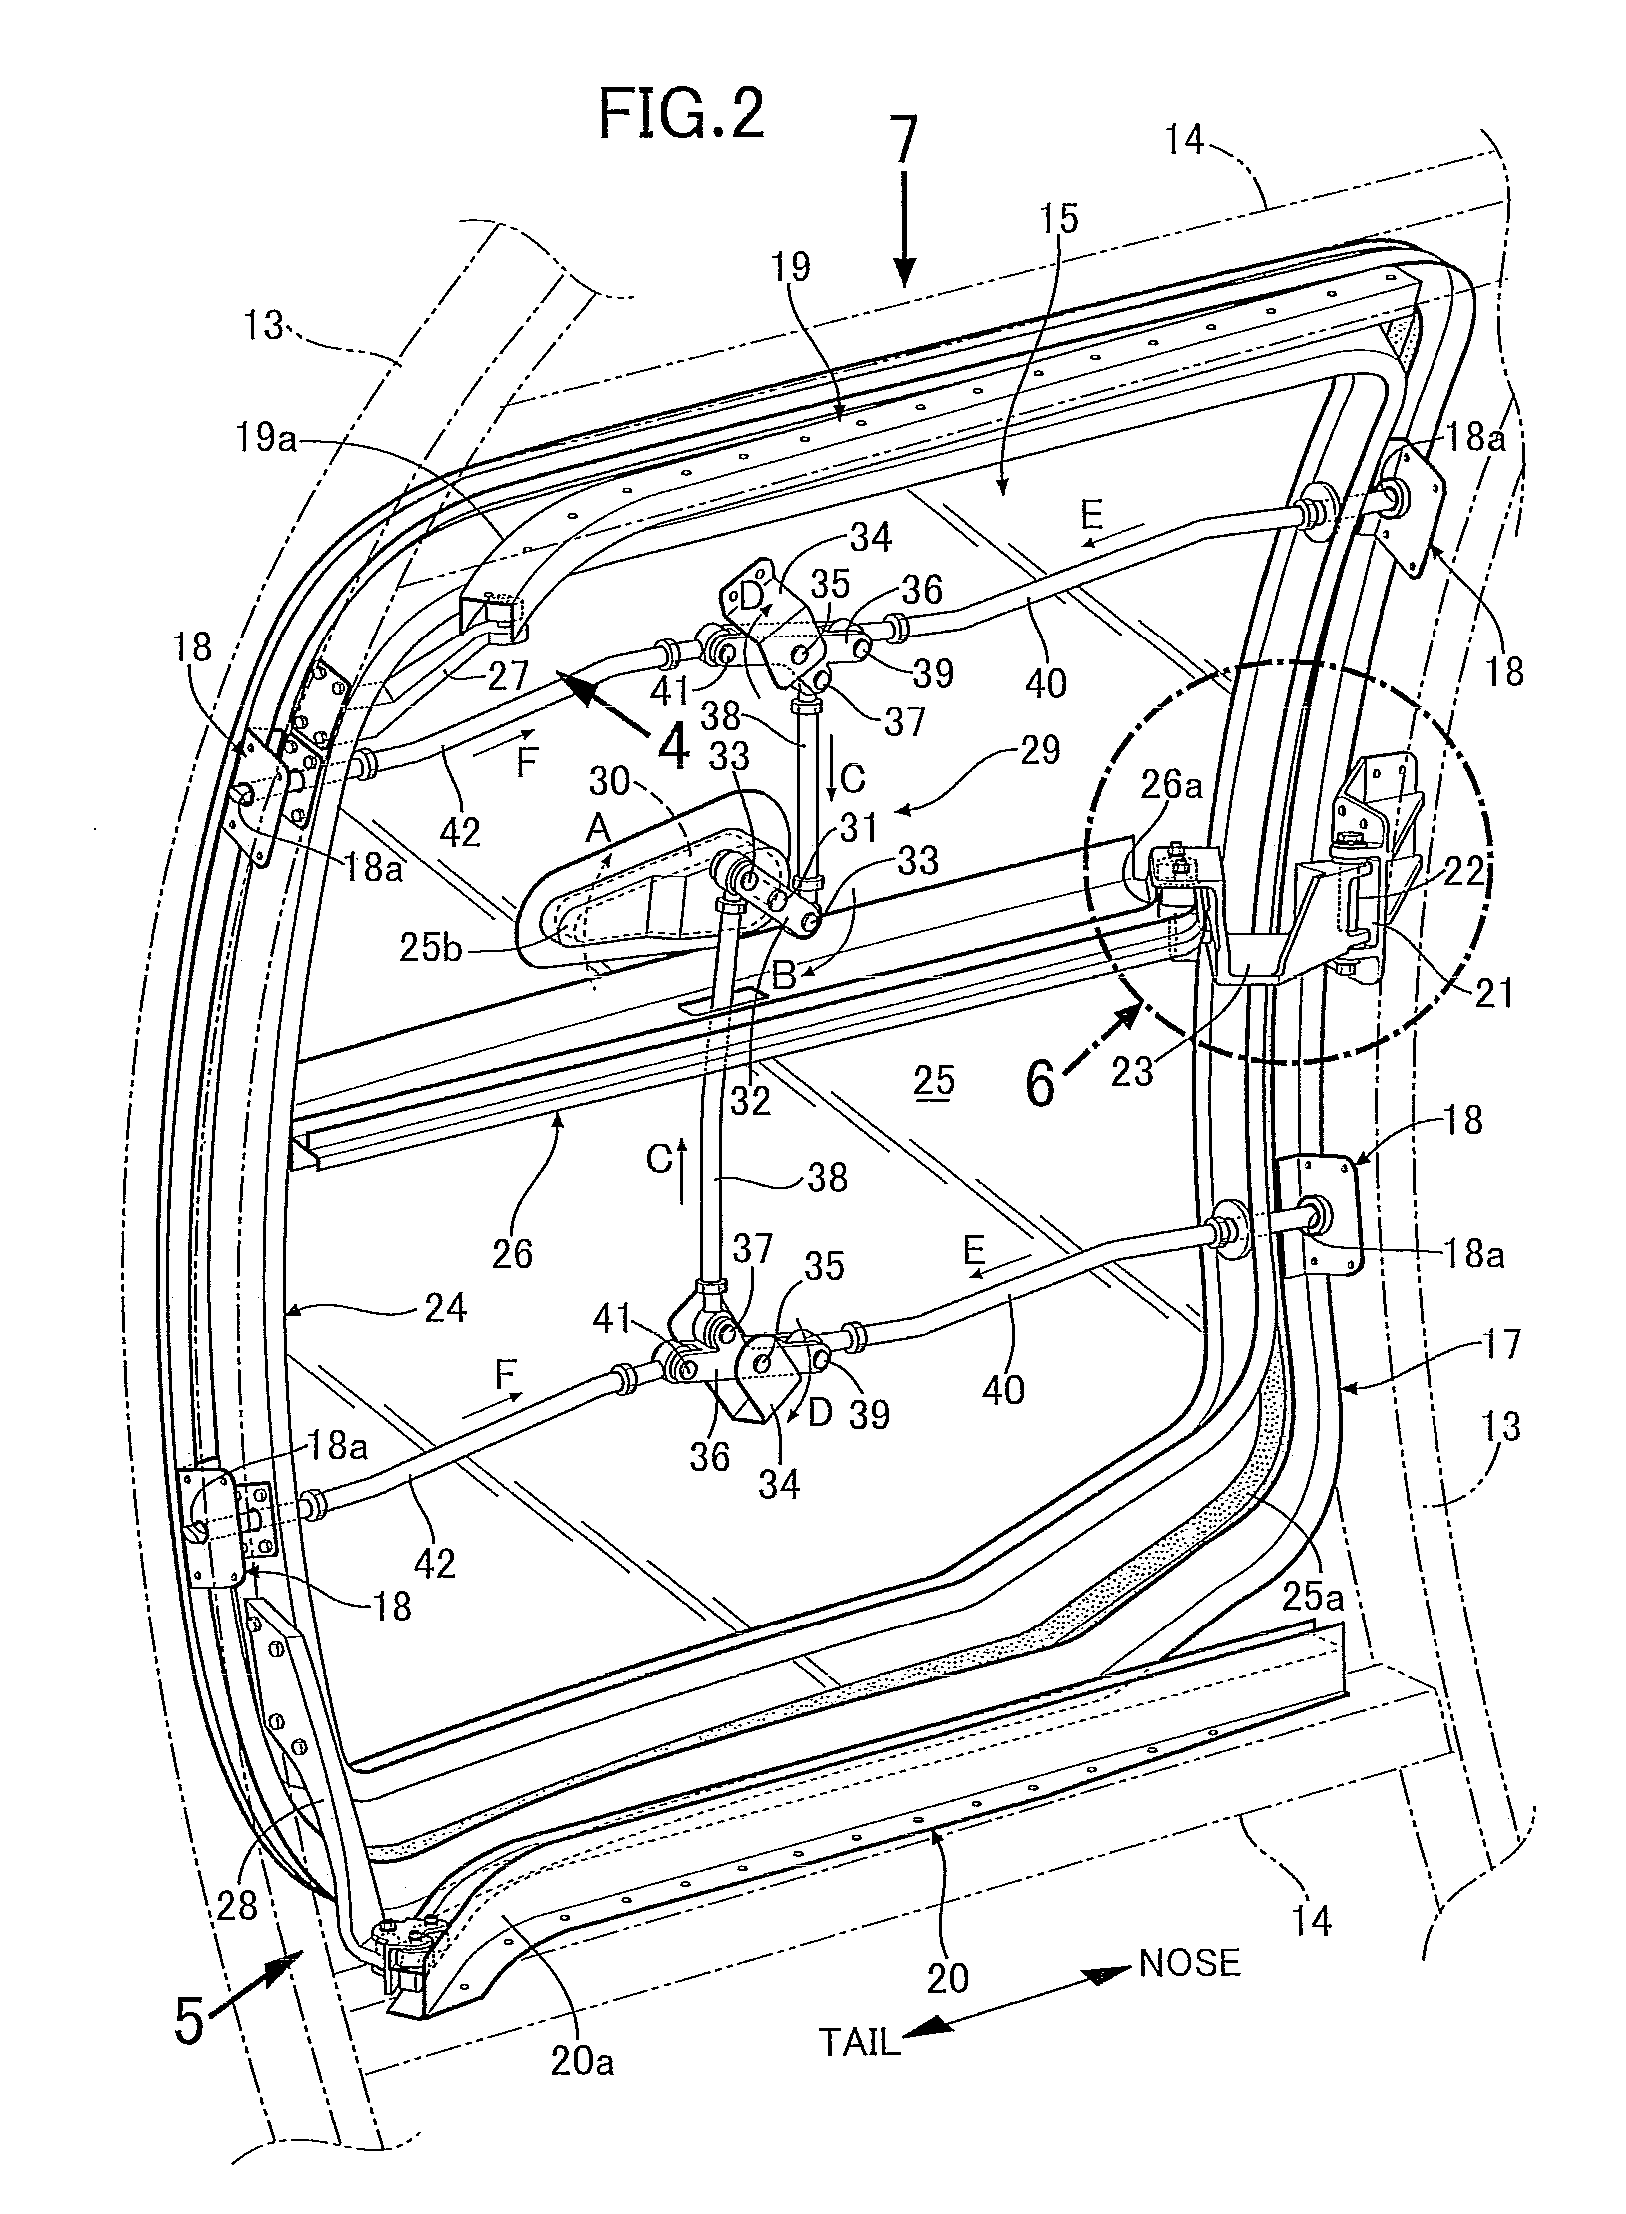 Slide door device for aircraft